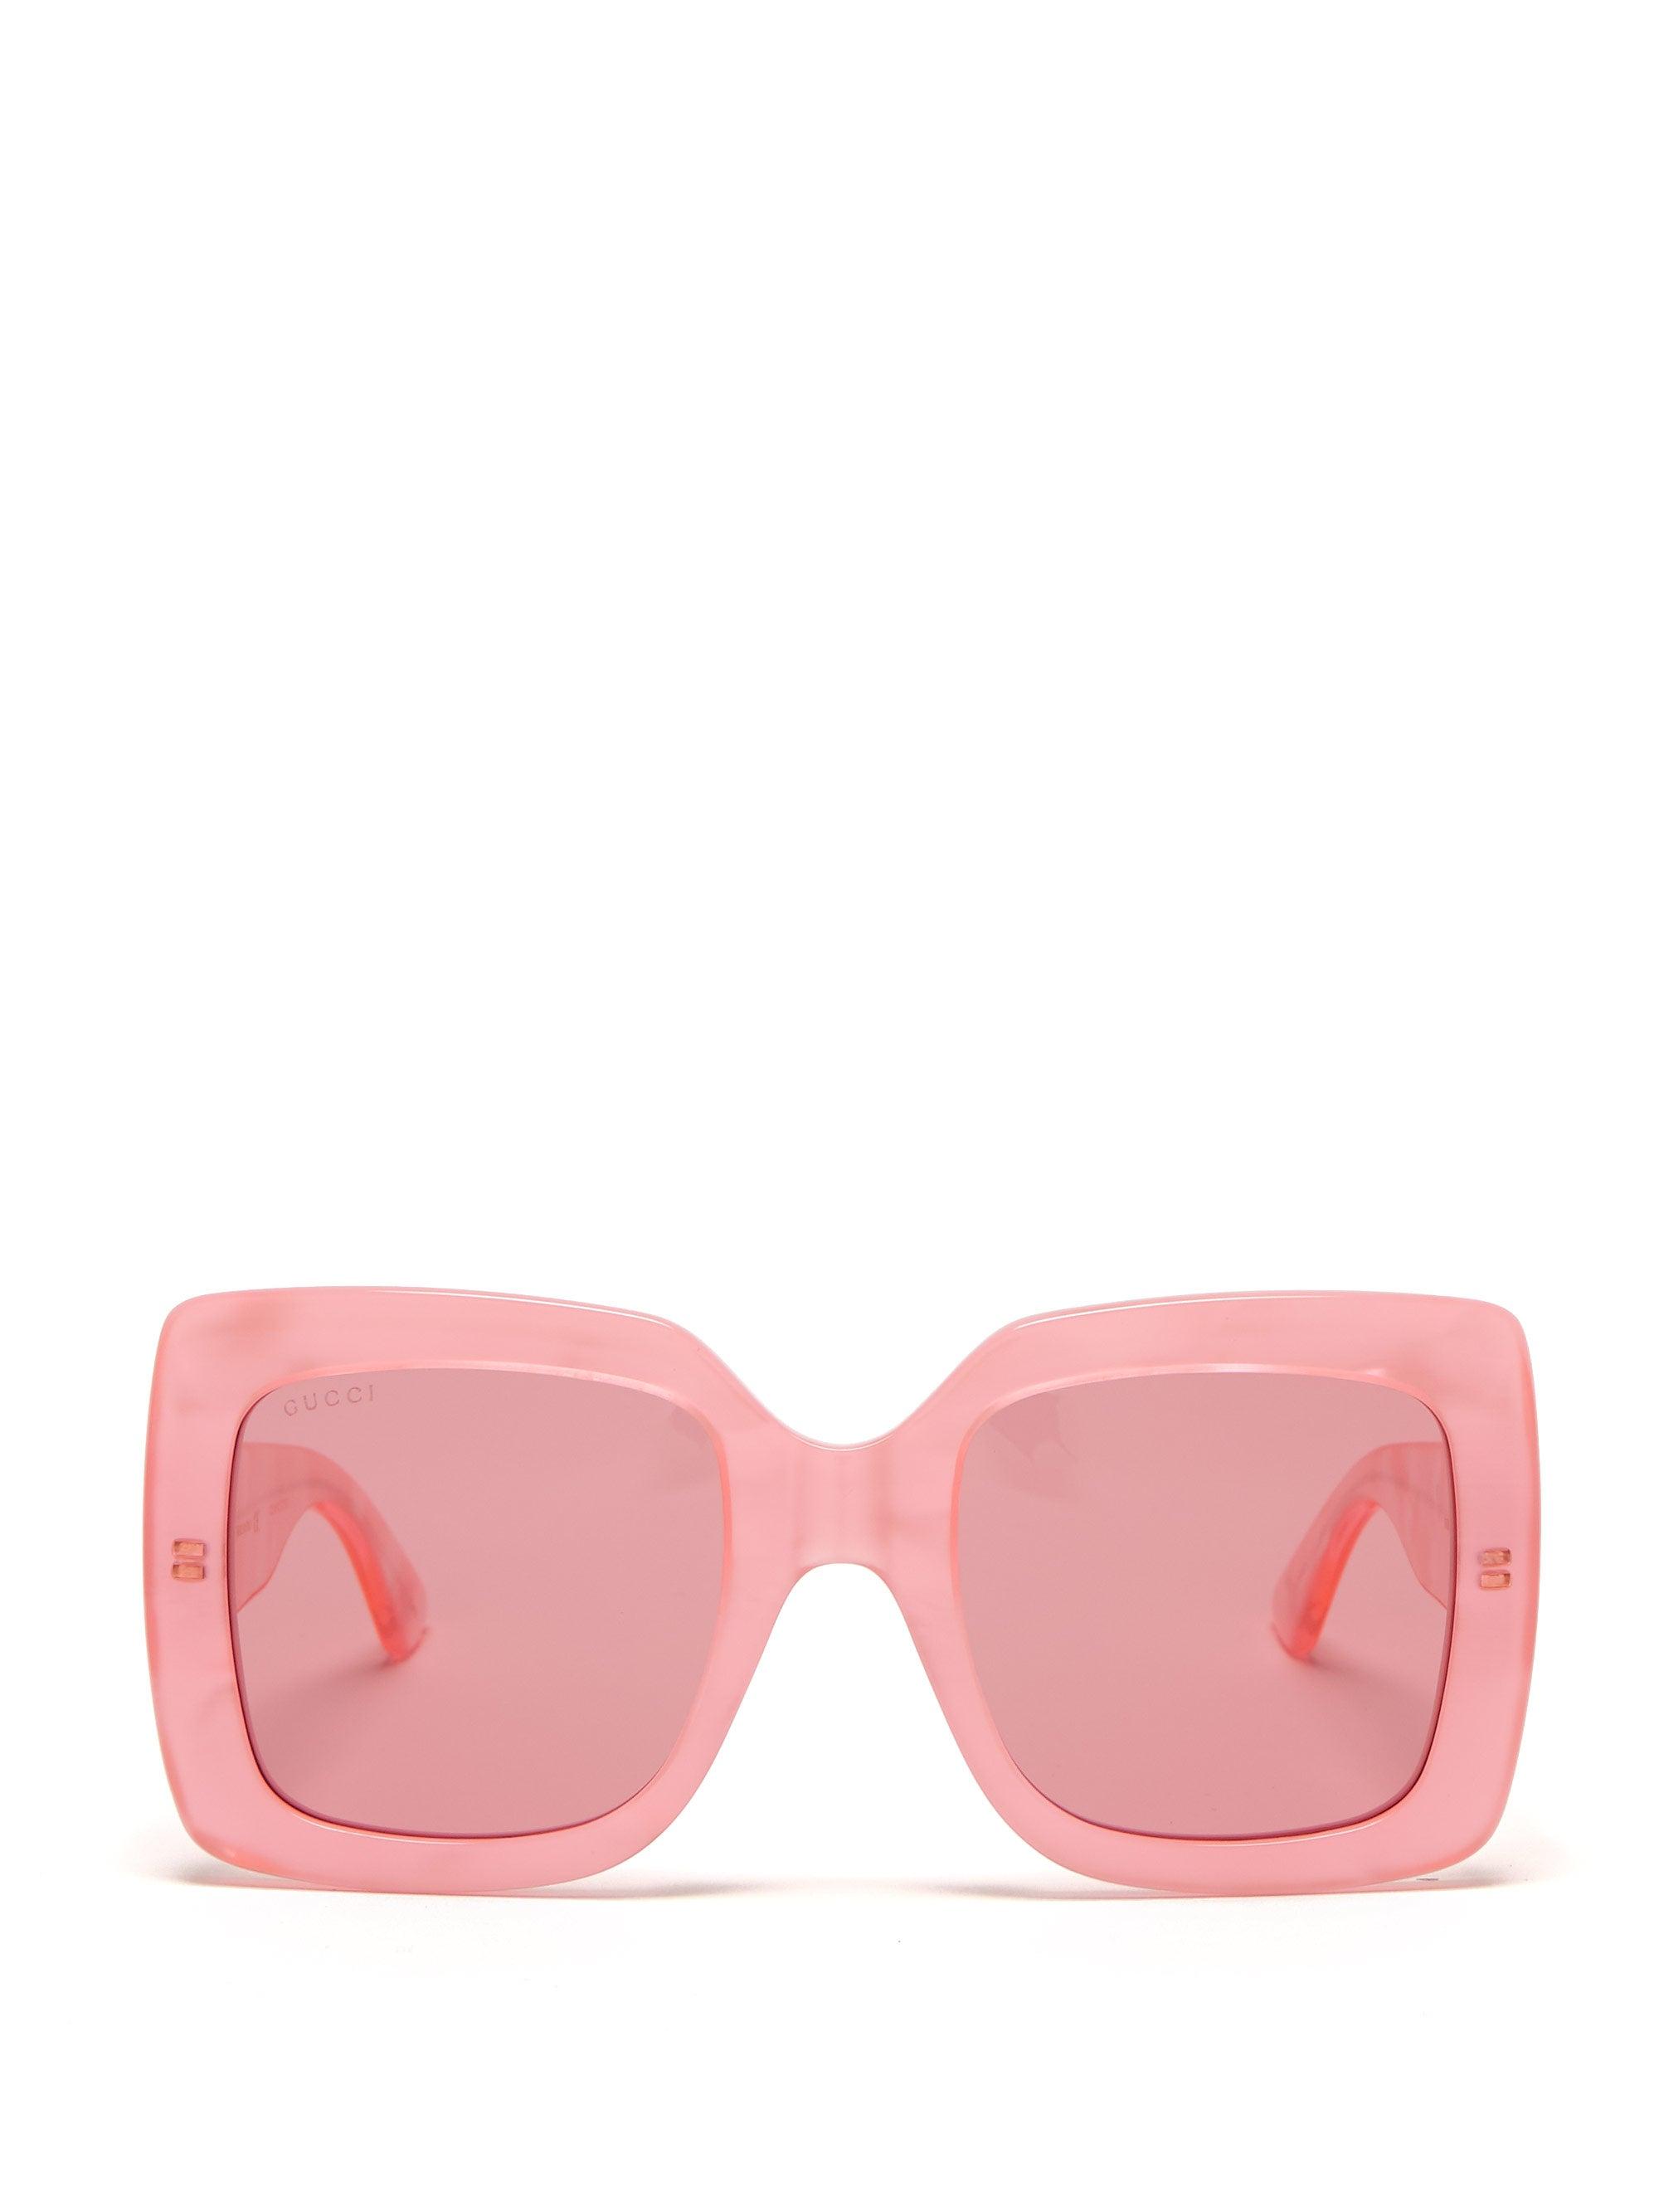 Gucci Oversized Square Pearlescent-acetate Sunglasses in Pink | Lyst